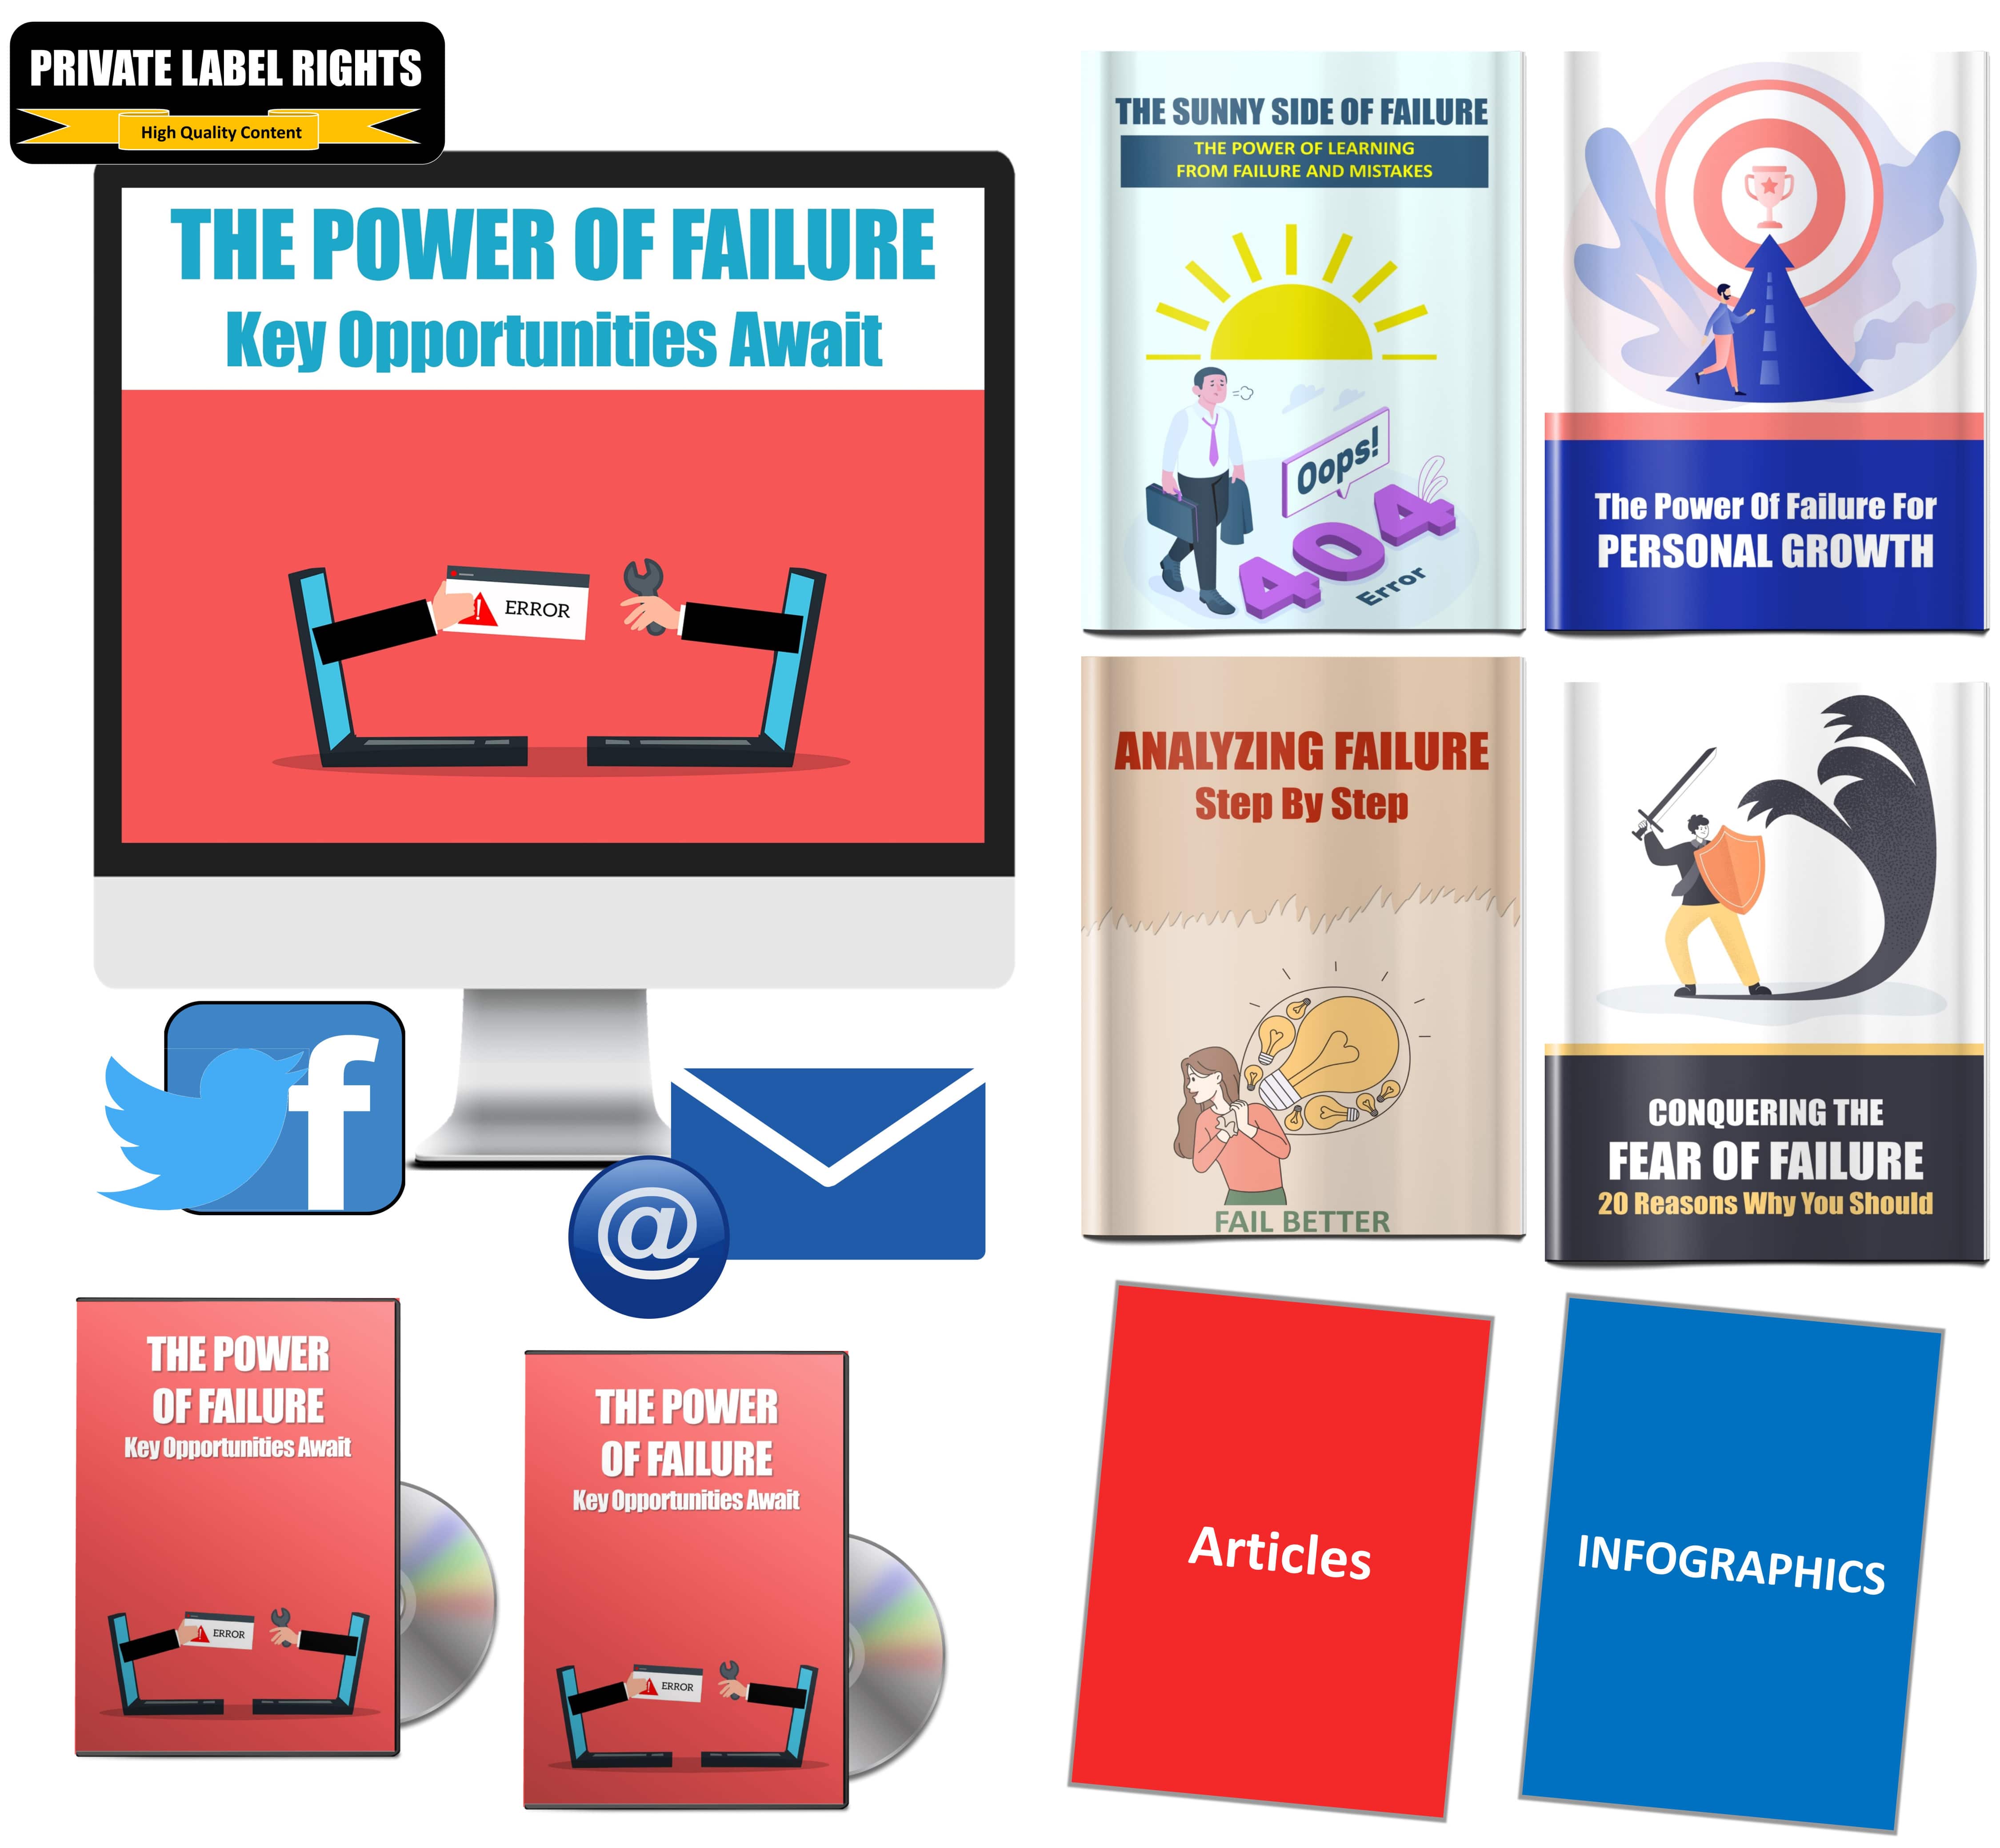 The Power Of Failure – Key Opportunities Await  Giant Content Pack with PLR Rights